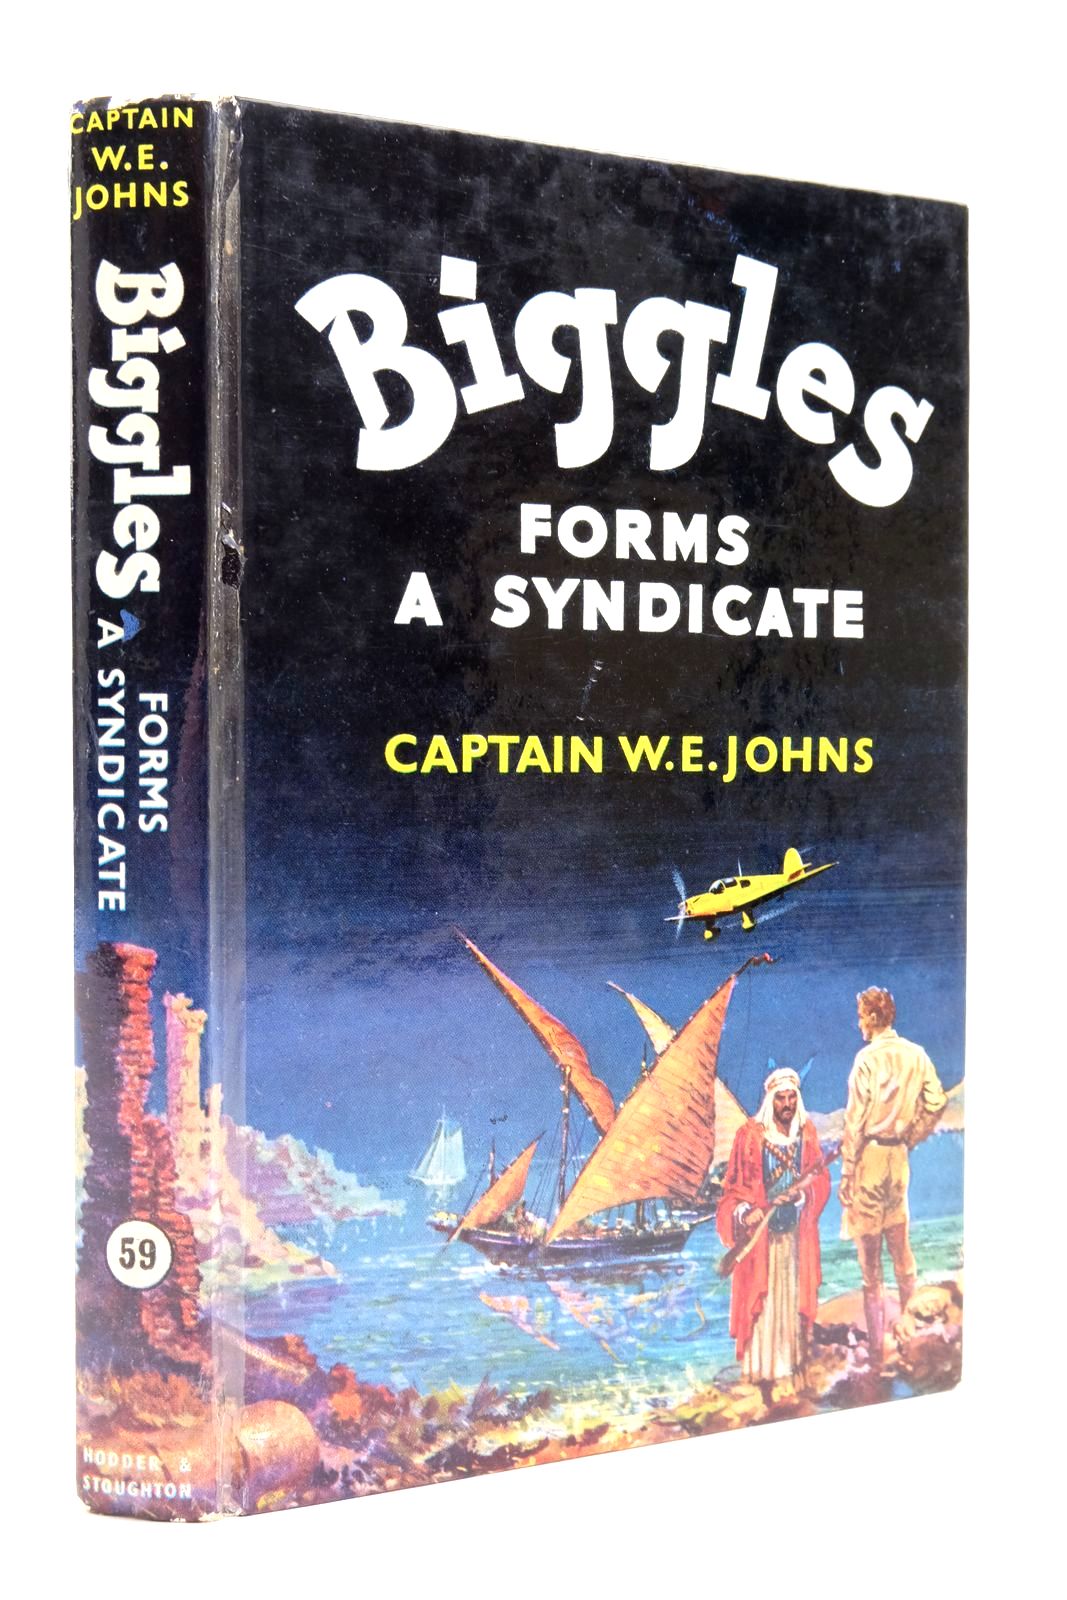 Photo of BIGGLES FORMS A SYNDICATE written by Johns, W.E. illustrated by Stead,  published by Hodder & Stoughton (STOCK CODE: 2138783)  for sale by Stella & Rose's Books